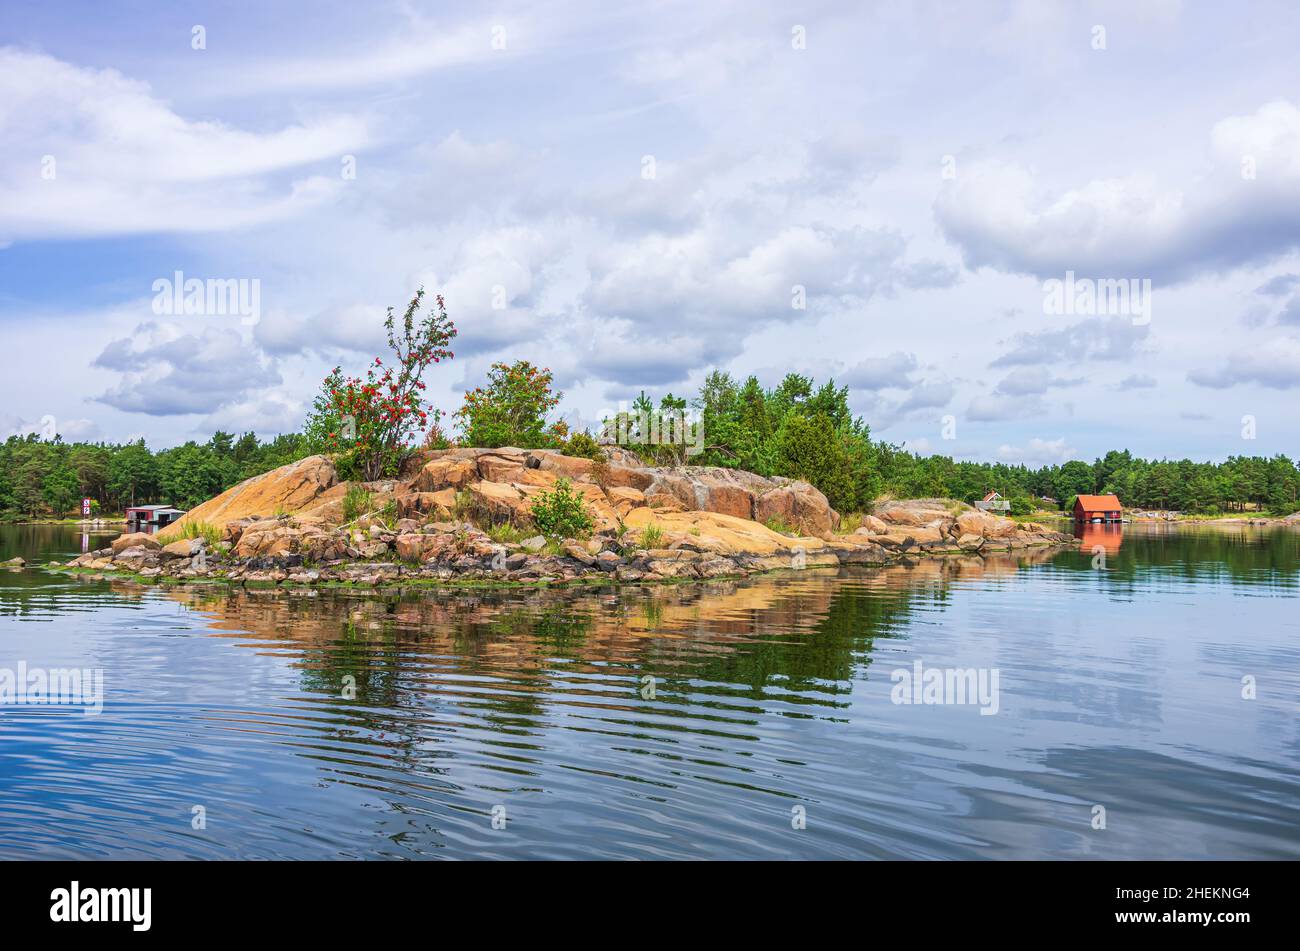 Swedish East Coast High Resolution Stock Photography and Images - Alamy